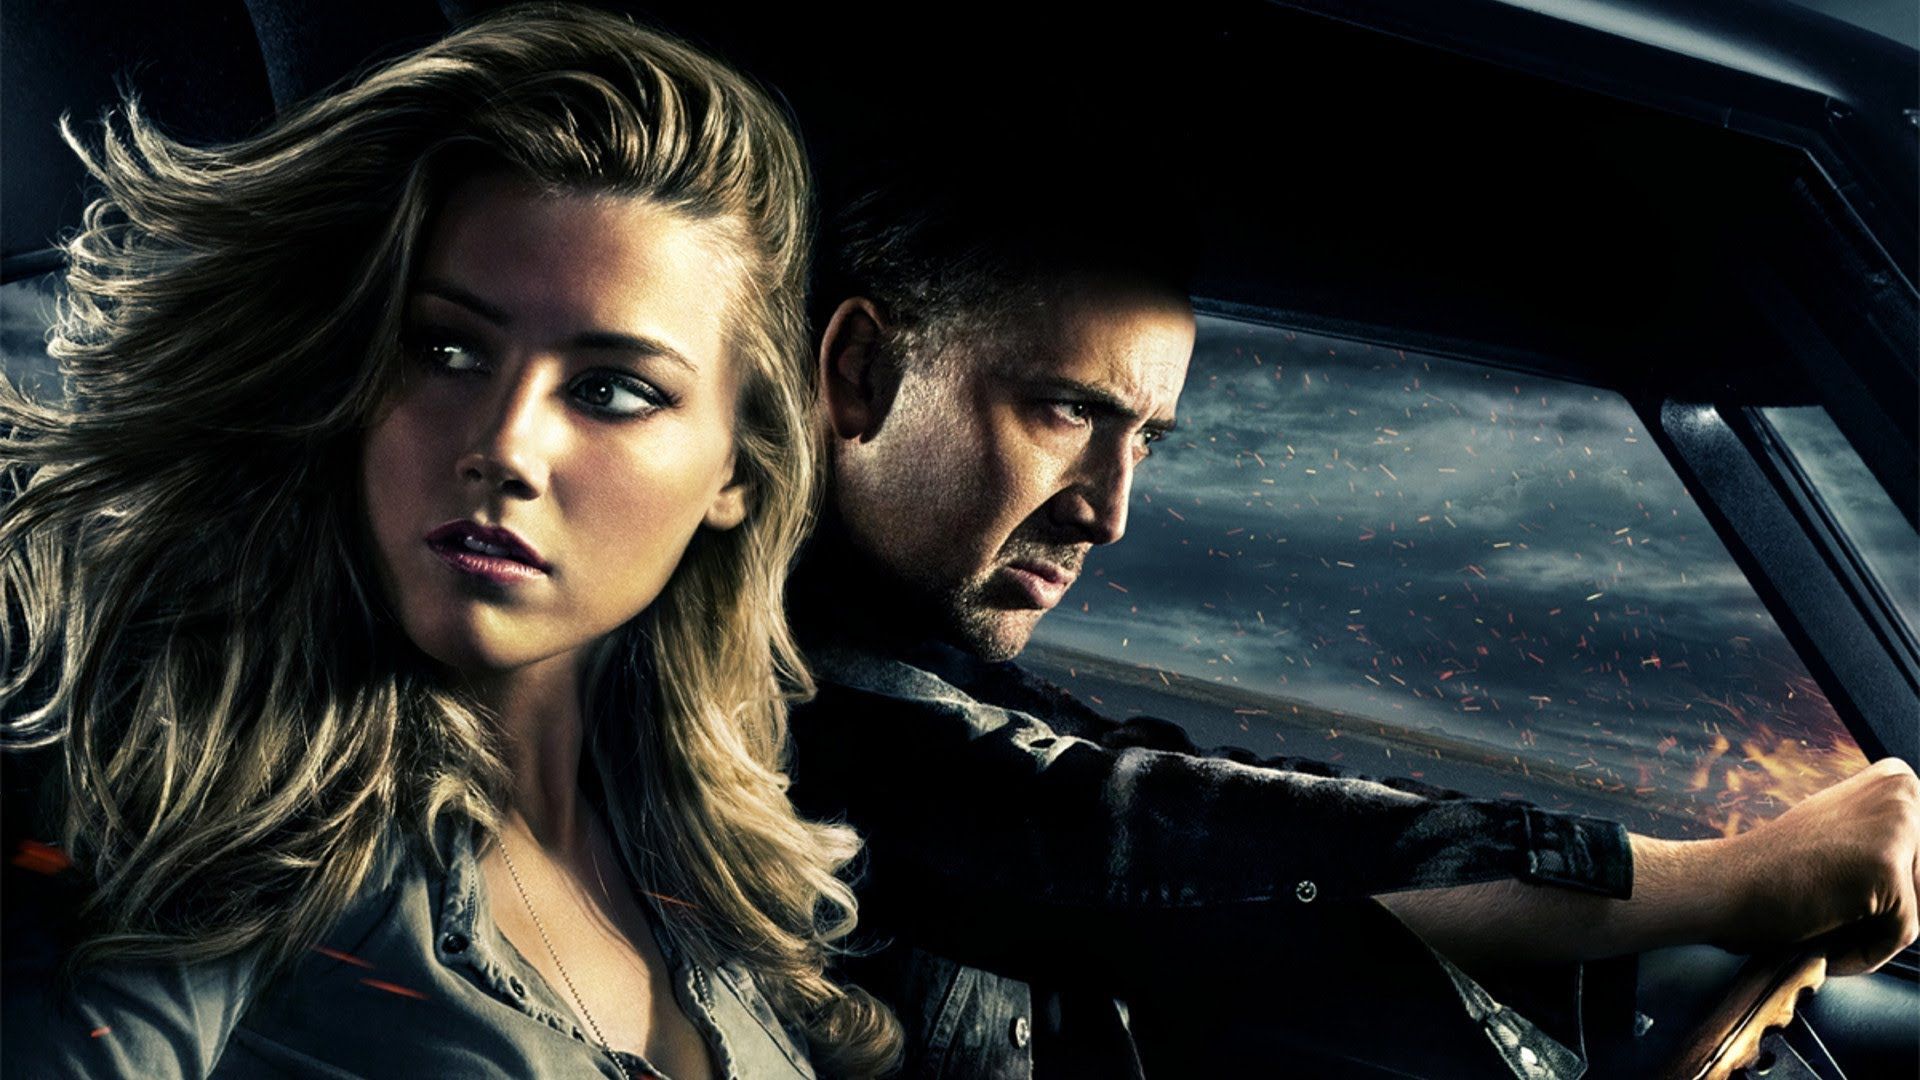 Drive Angry wallpaper, Movie, HQ Drive Angry pictureK Wallpaper 2019